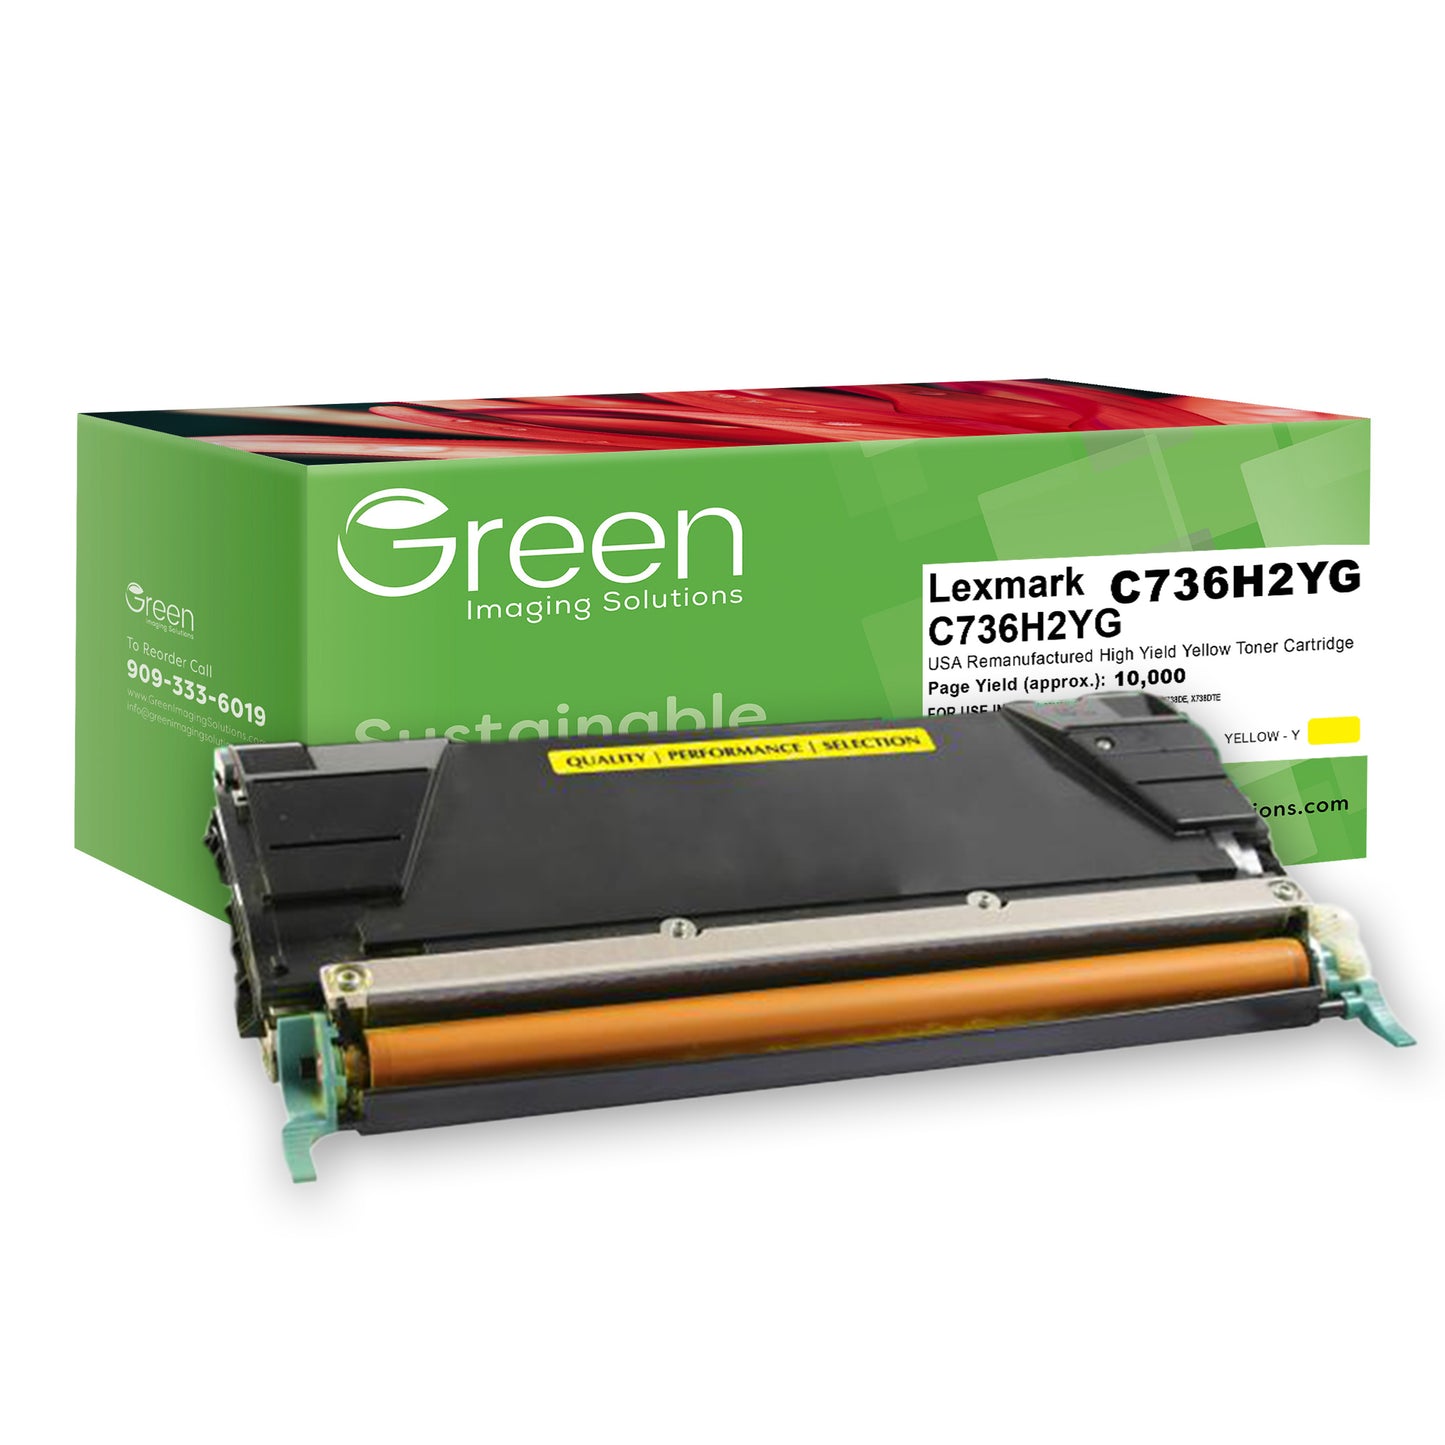 Green Imaging Solutions USA Remanufactured High Yield Yellow Toner Cartridge for Lexmark C736/X736/X738